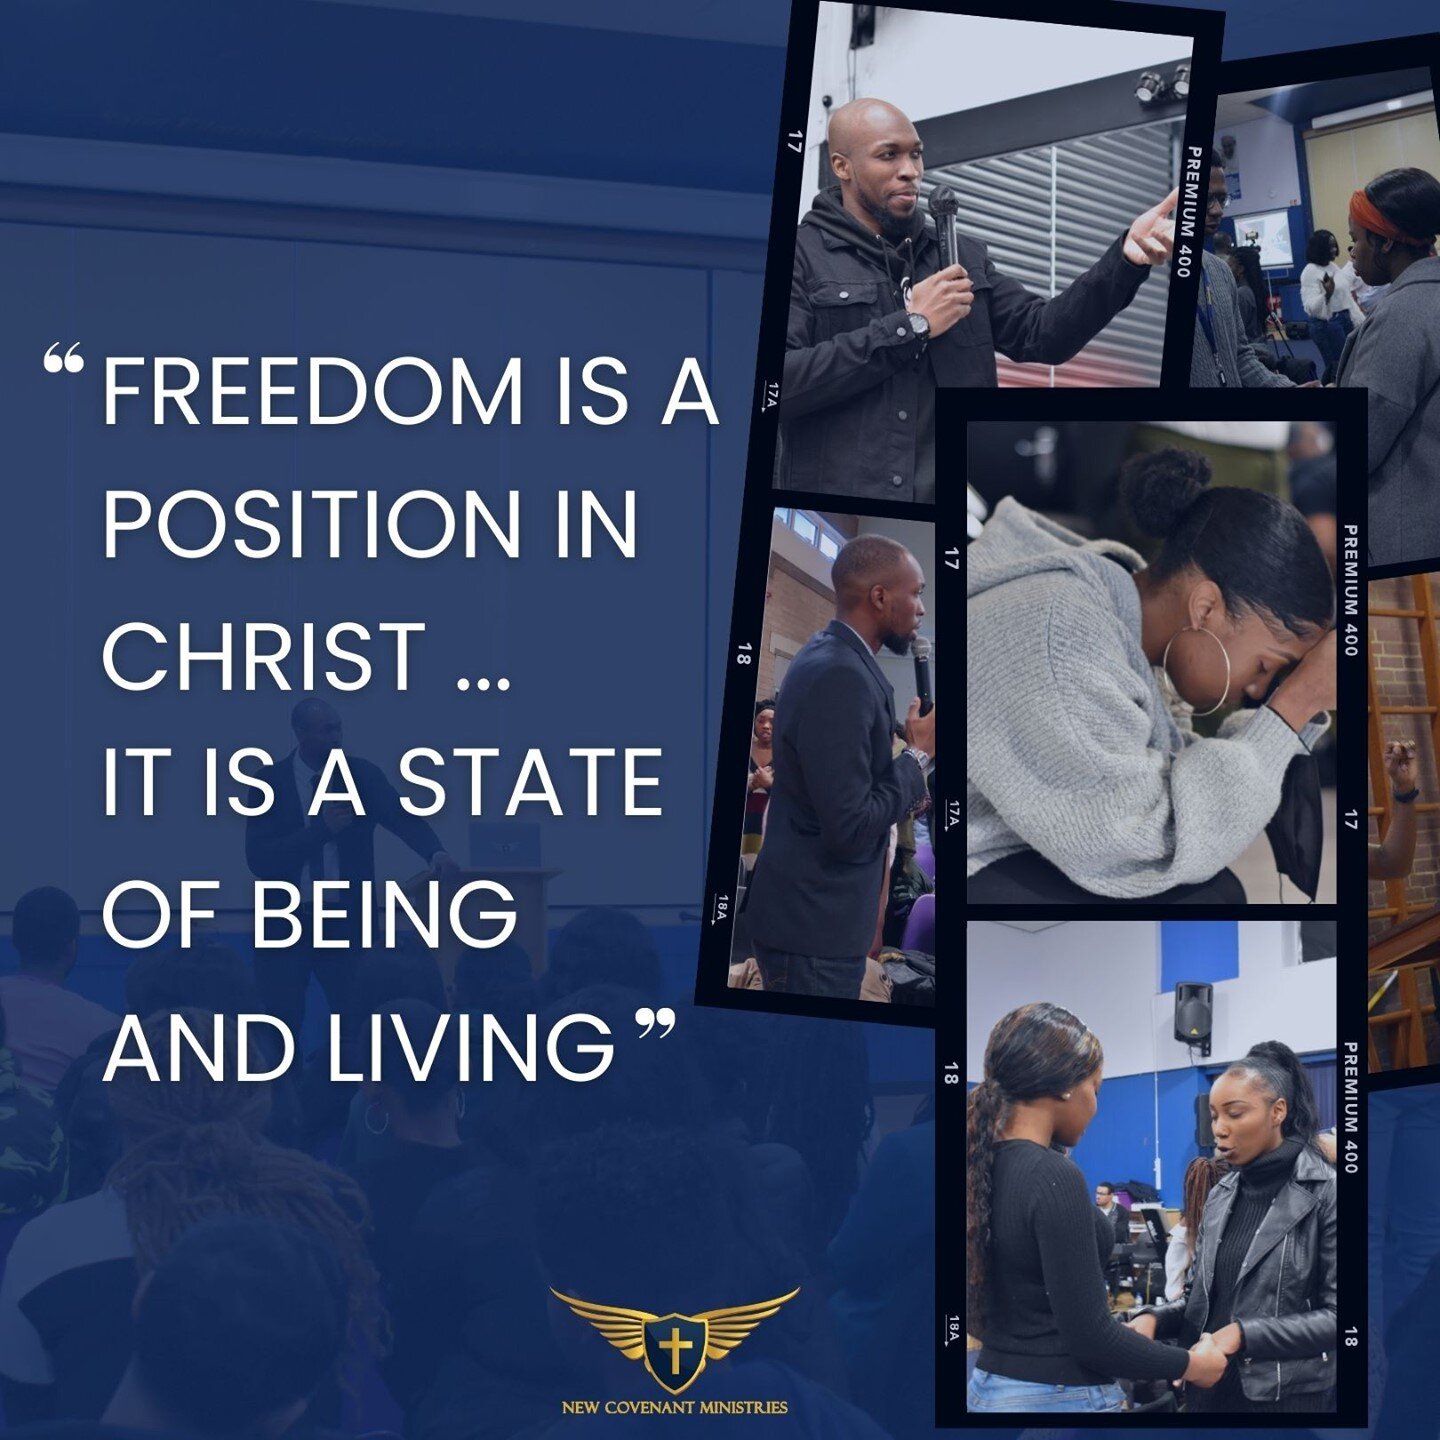 &quot;Freedom is a position in Christ... it is a state of being and living&quot; - Apostle @emmanuel_adeseko

Comment  with a 🔥 if you agree!
#Newcovenantministries #Jesus #Purpose #People